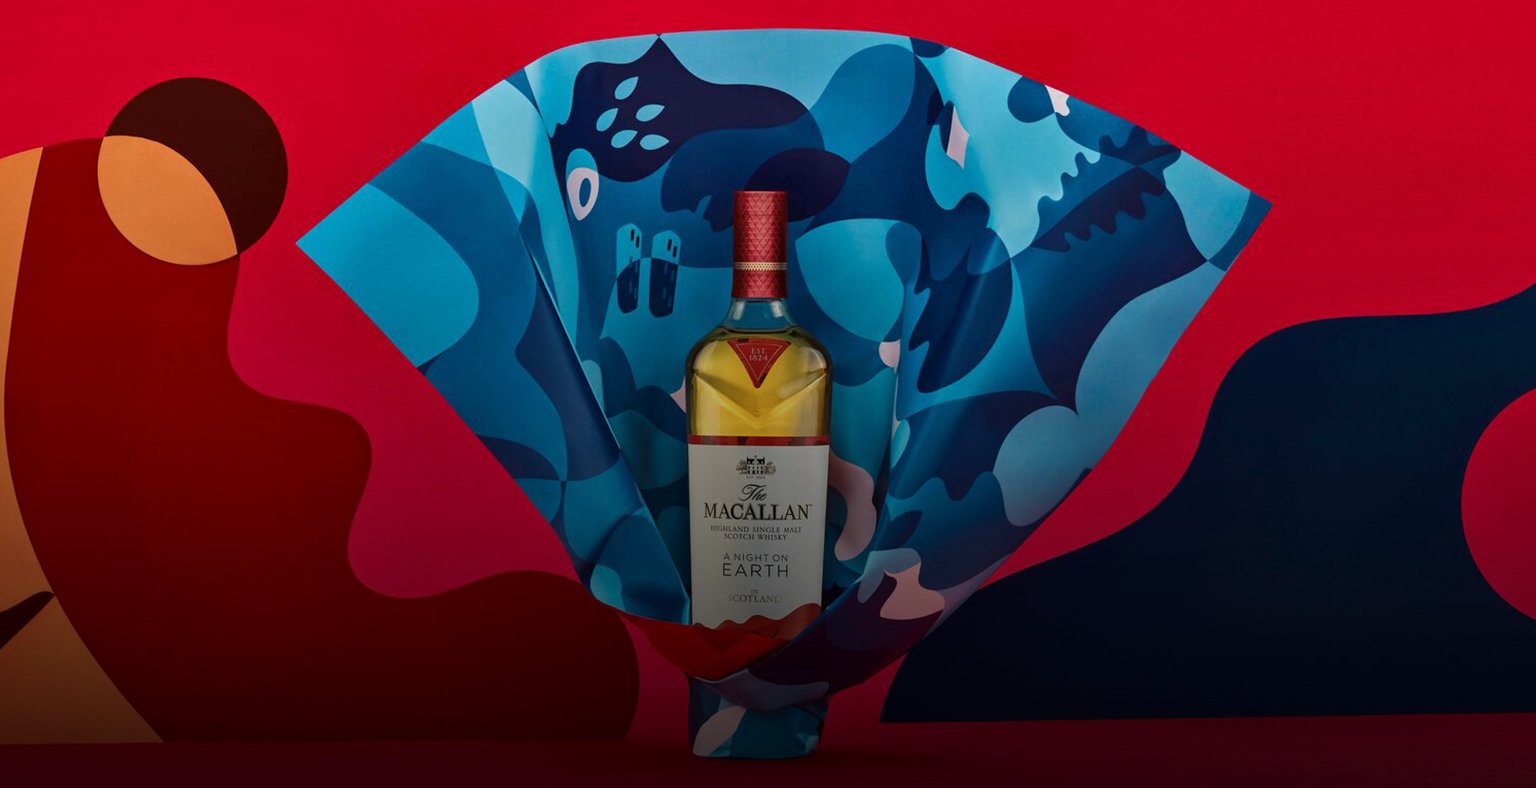 A bottle of The Macallan A Night on Earth - The Journey being unwrapped in colourful illustrations.